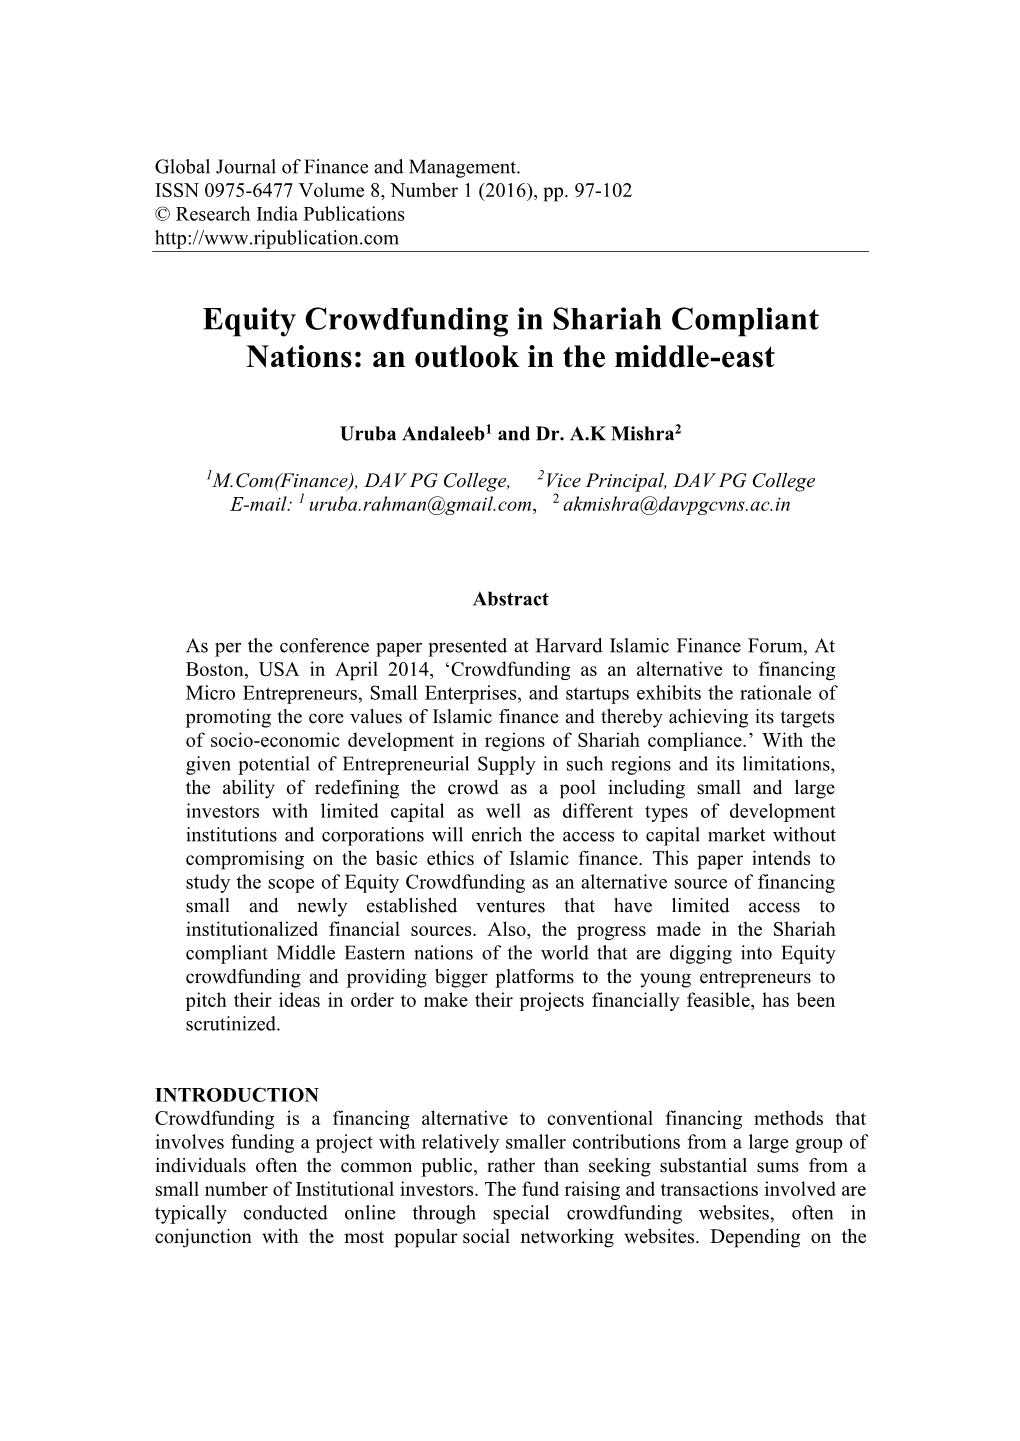 Equity Crowdfunding in Shariah Compliant Nations: an Outlook in the Middle-East